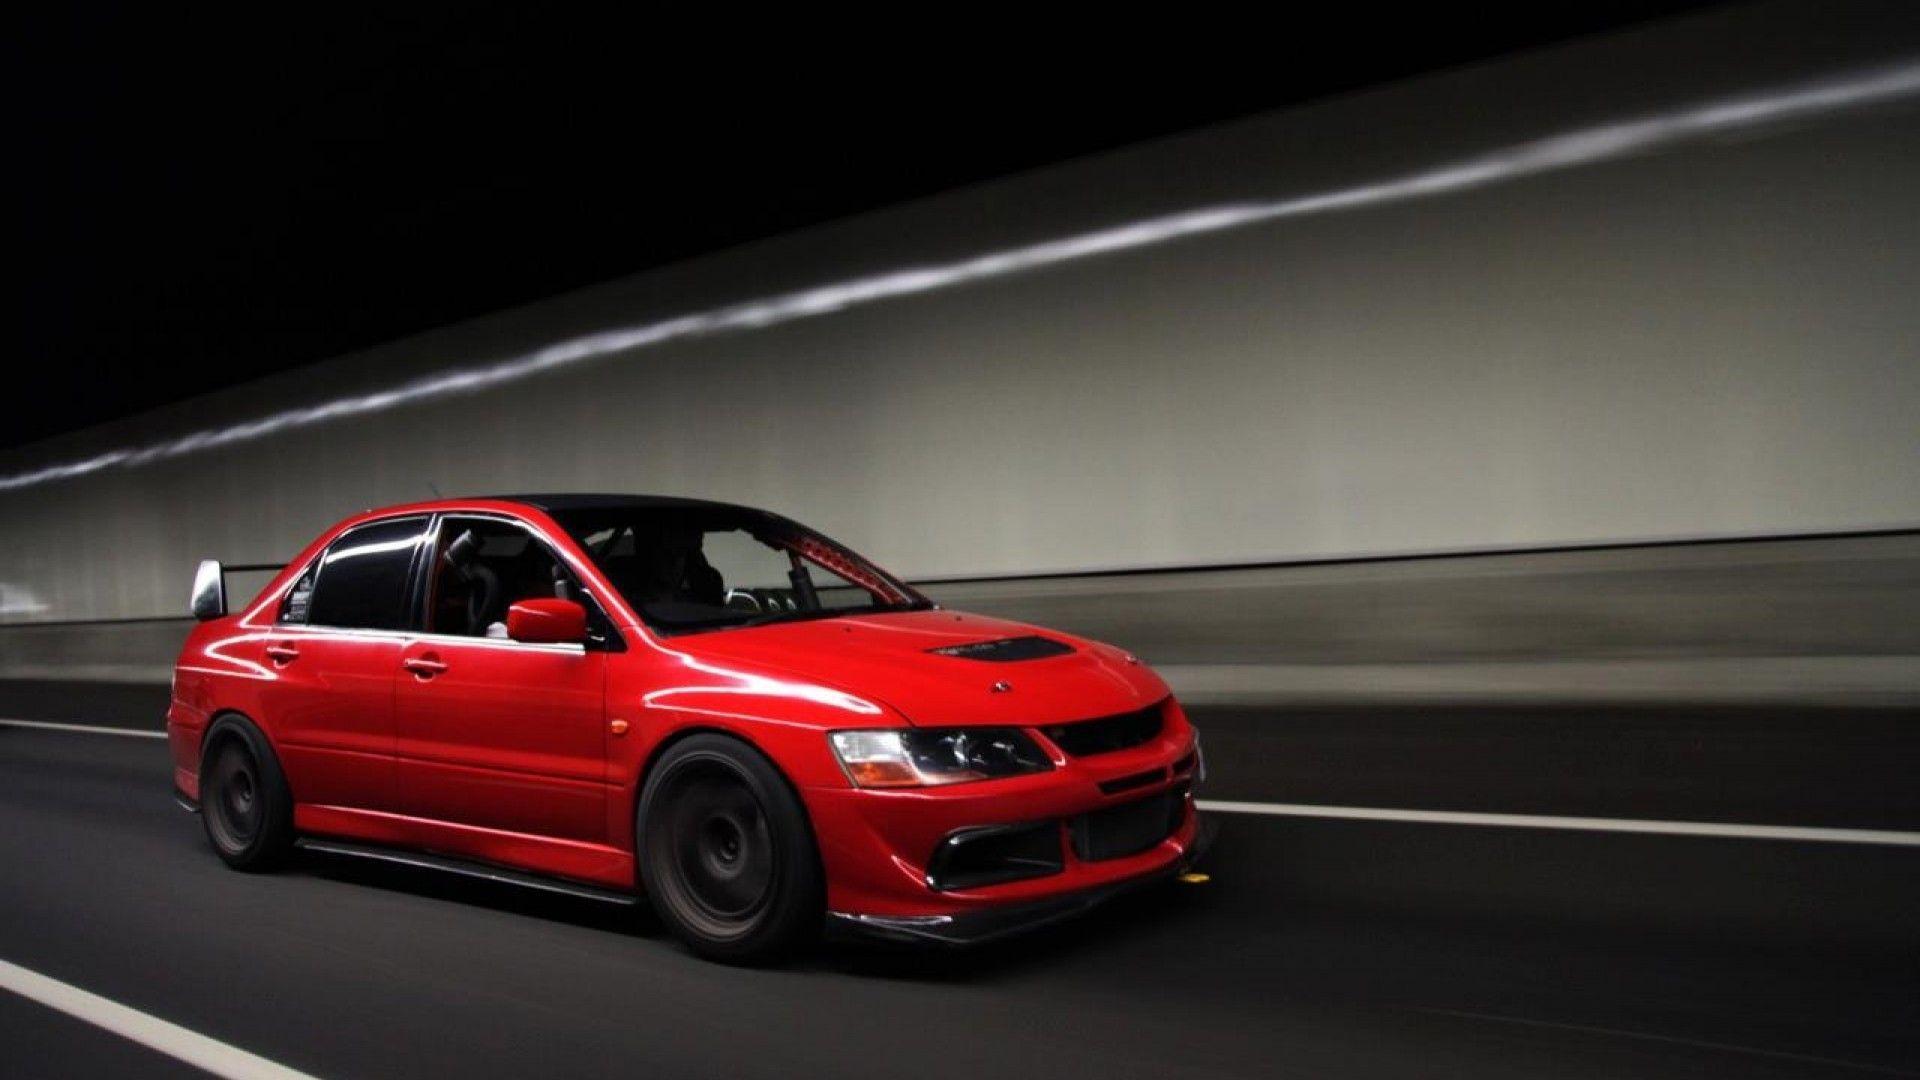 Anyone have an Evo 9 wallpaper for iphone